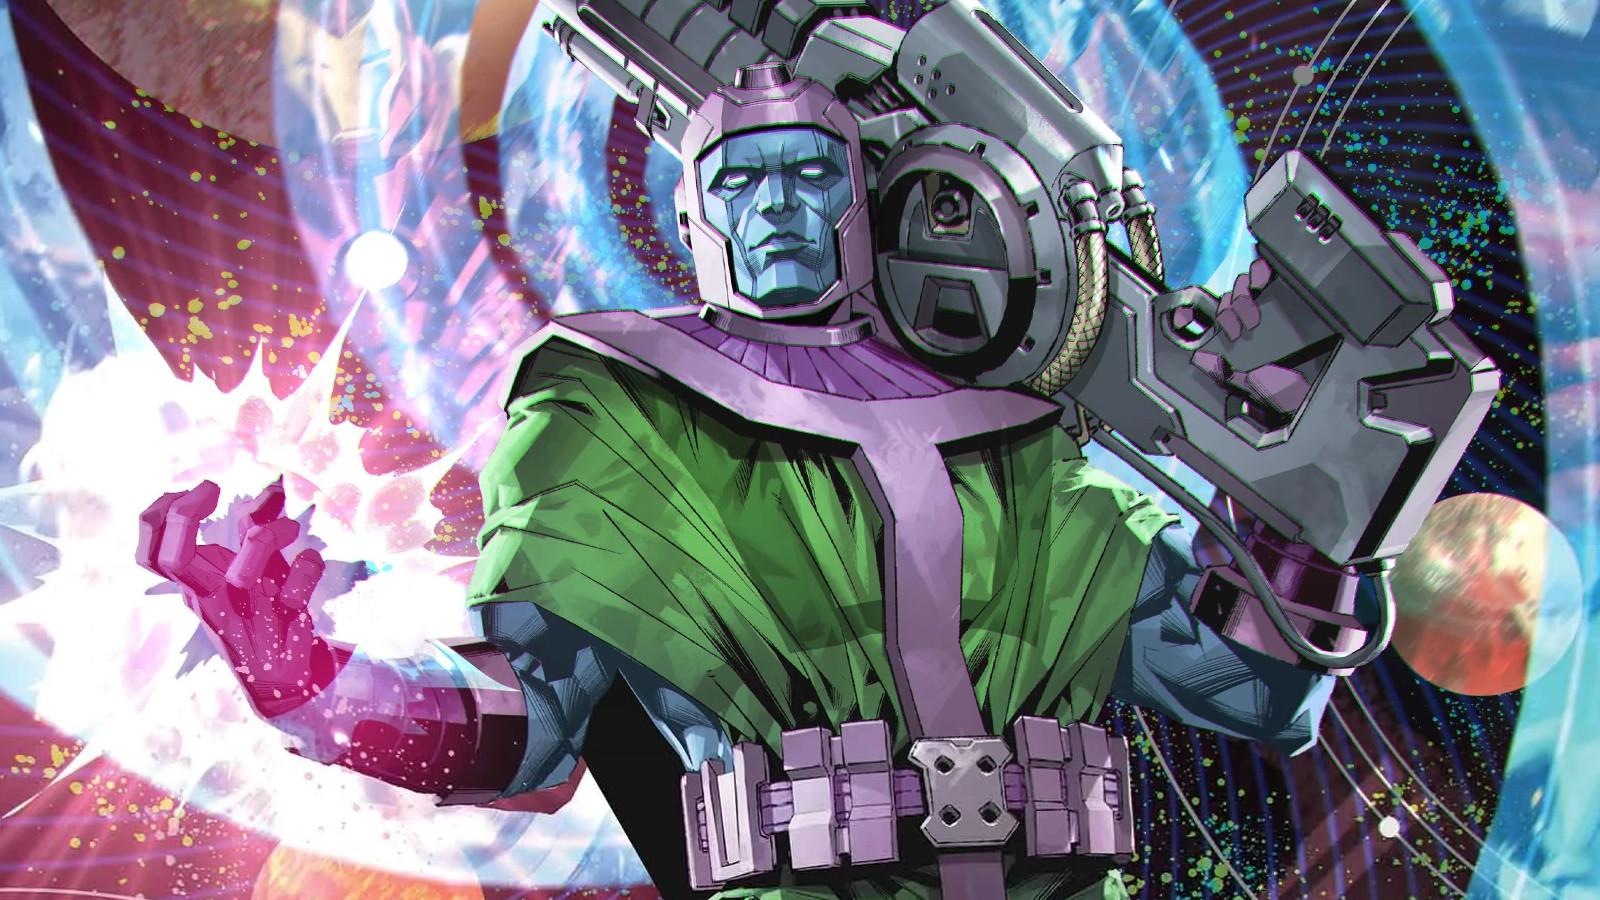 Kang the Conqueror on the Timeless #1 cover art